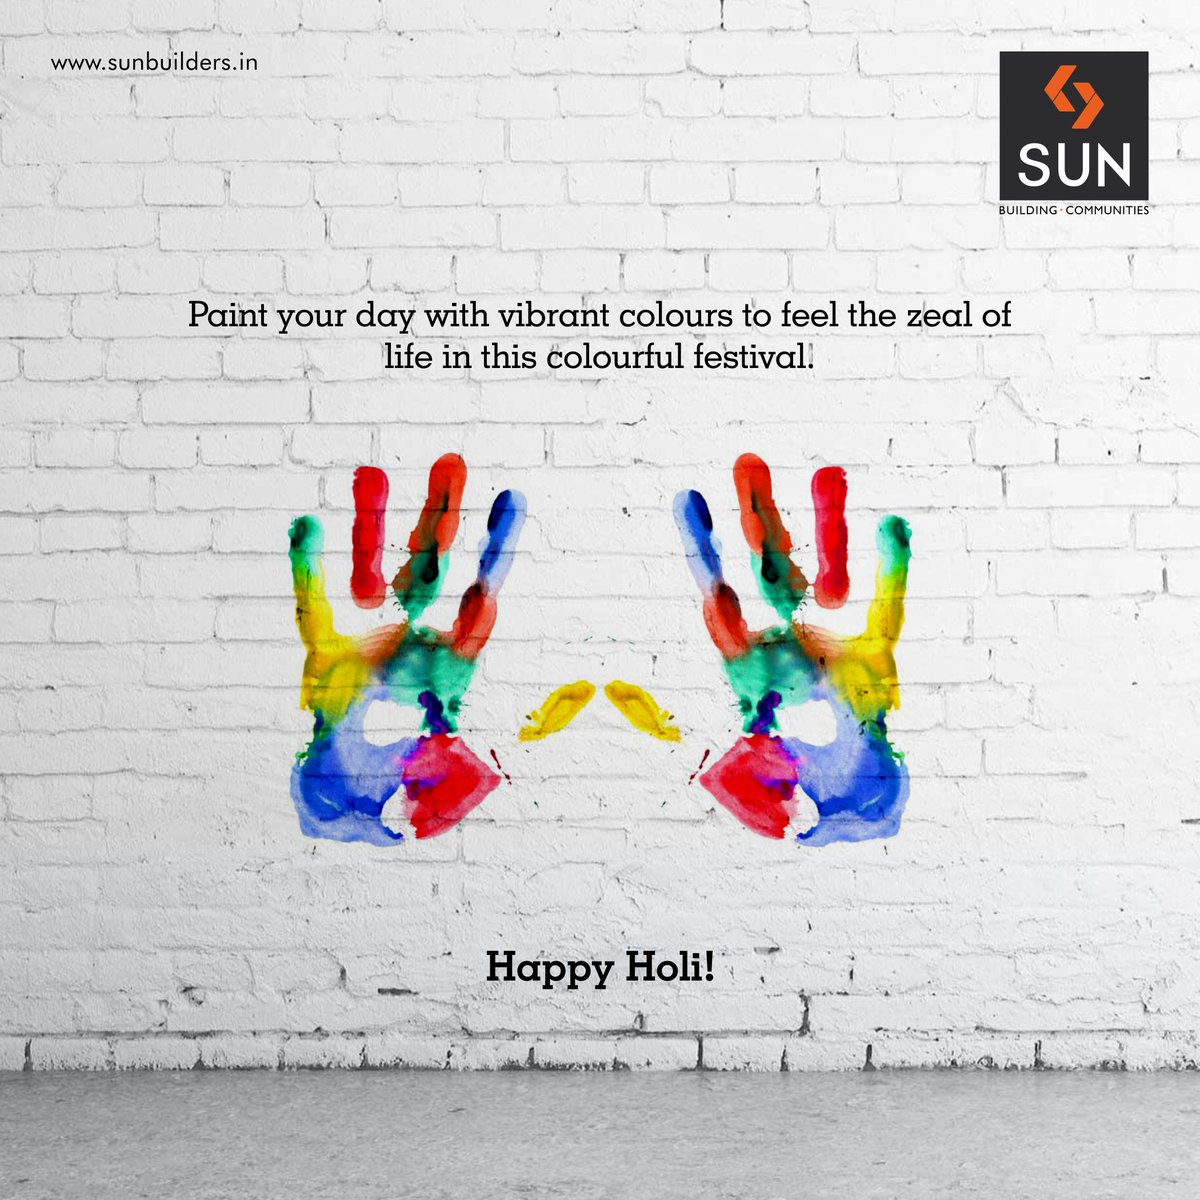 Celebrate this colourful festival  and fill your day with utmost contentment.
Happy Holi! https://t.co/MsjQkGl1xH